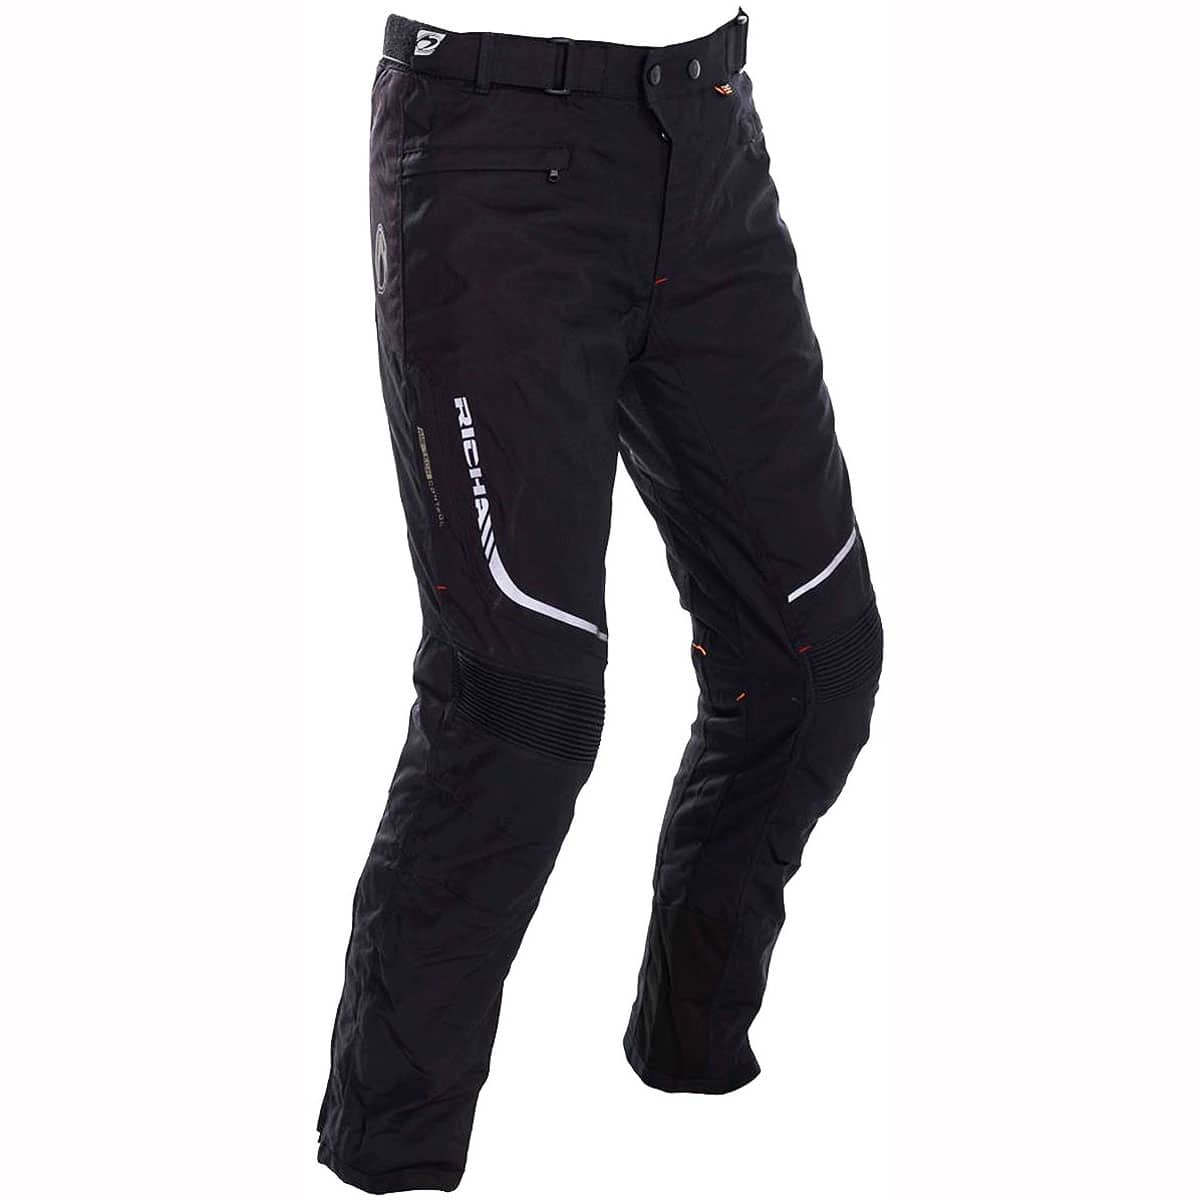 The <b>Richa Colorado waterproof motorcycle trousers</b> offer durable value without excessive cost - Front